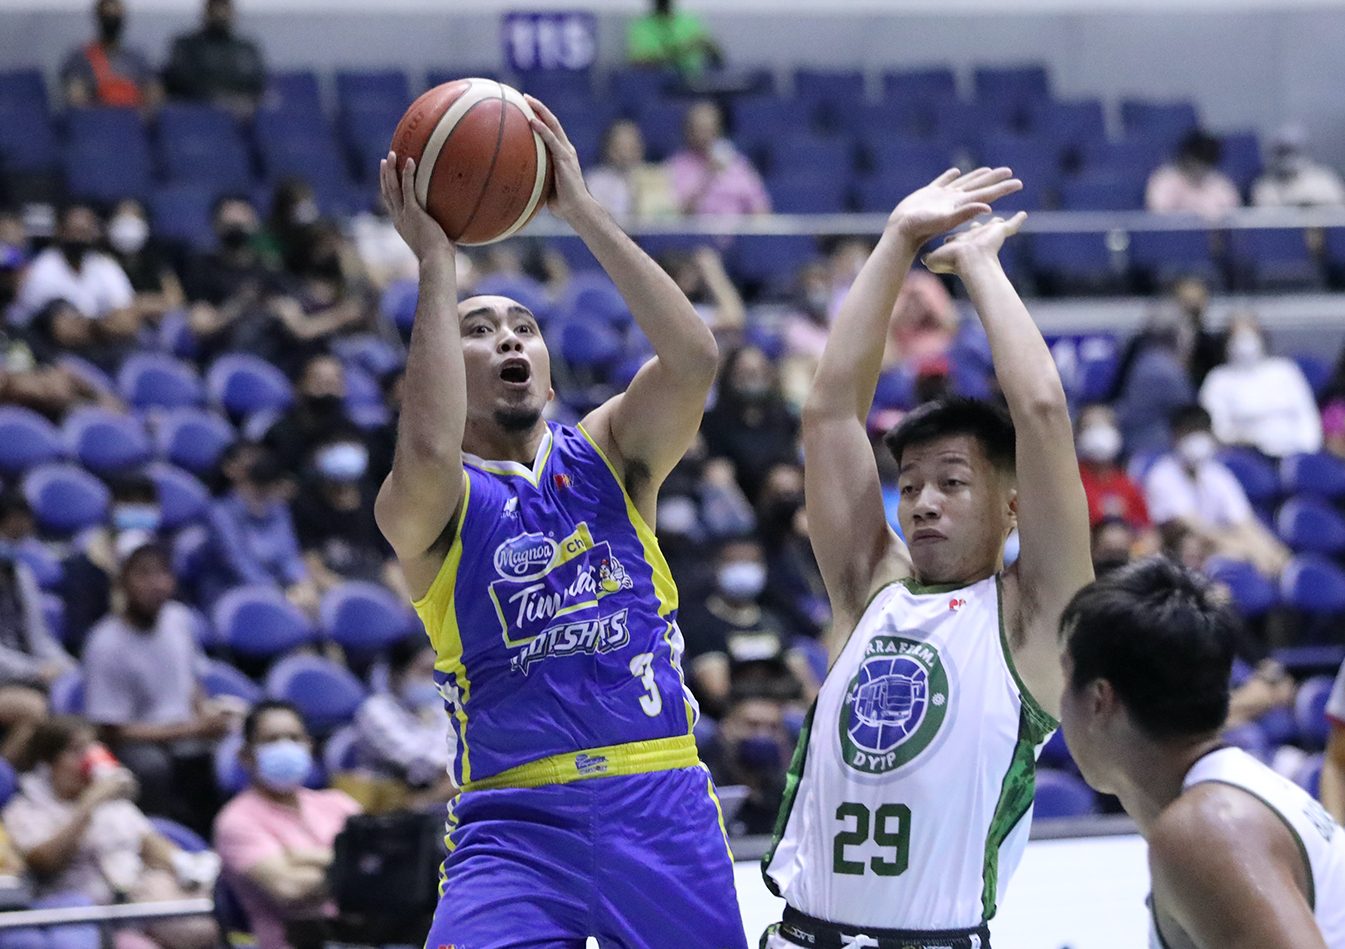 Paul Lee fits like glove in return for red-hot Magnolia